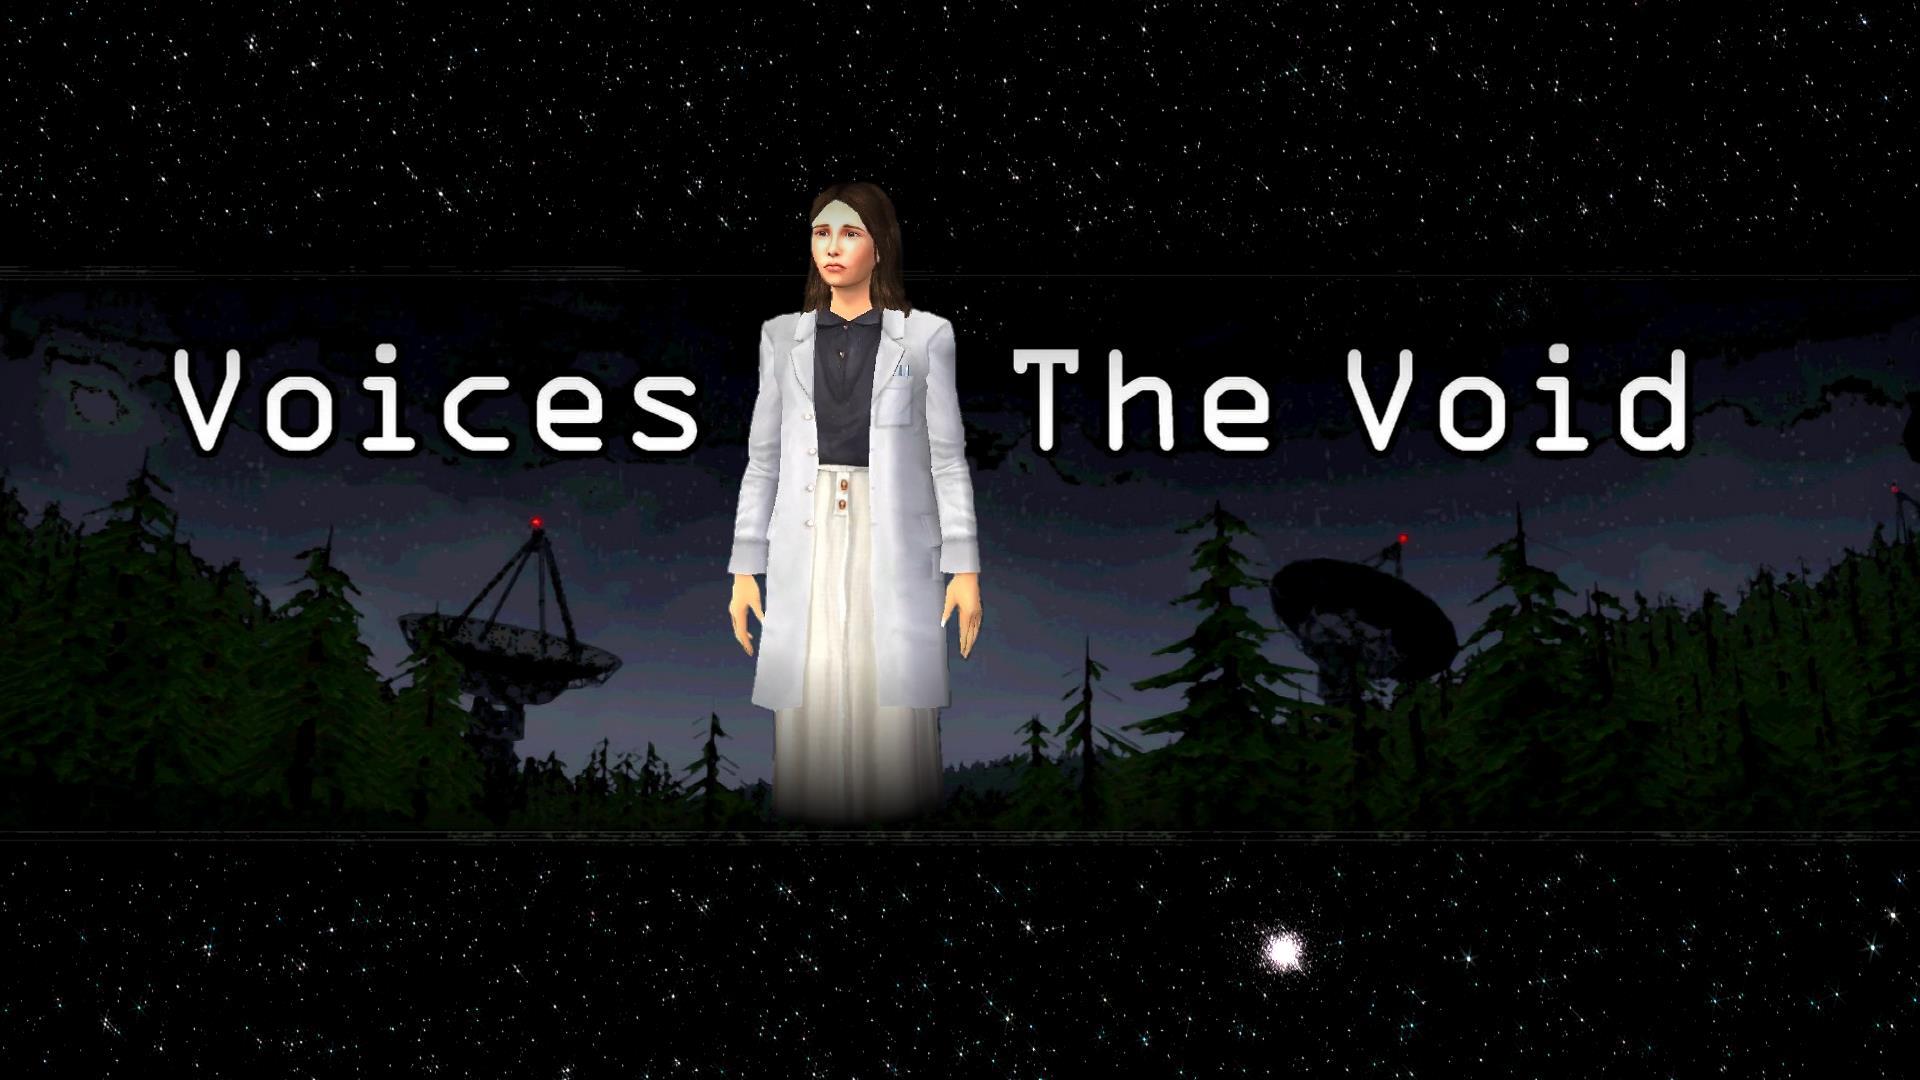 Voices of the Void игра. Voices of the Void моды. Voices of the Void Argemia. Сны Voices of the Void. Voices of the void играть с другом